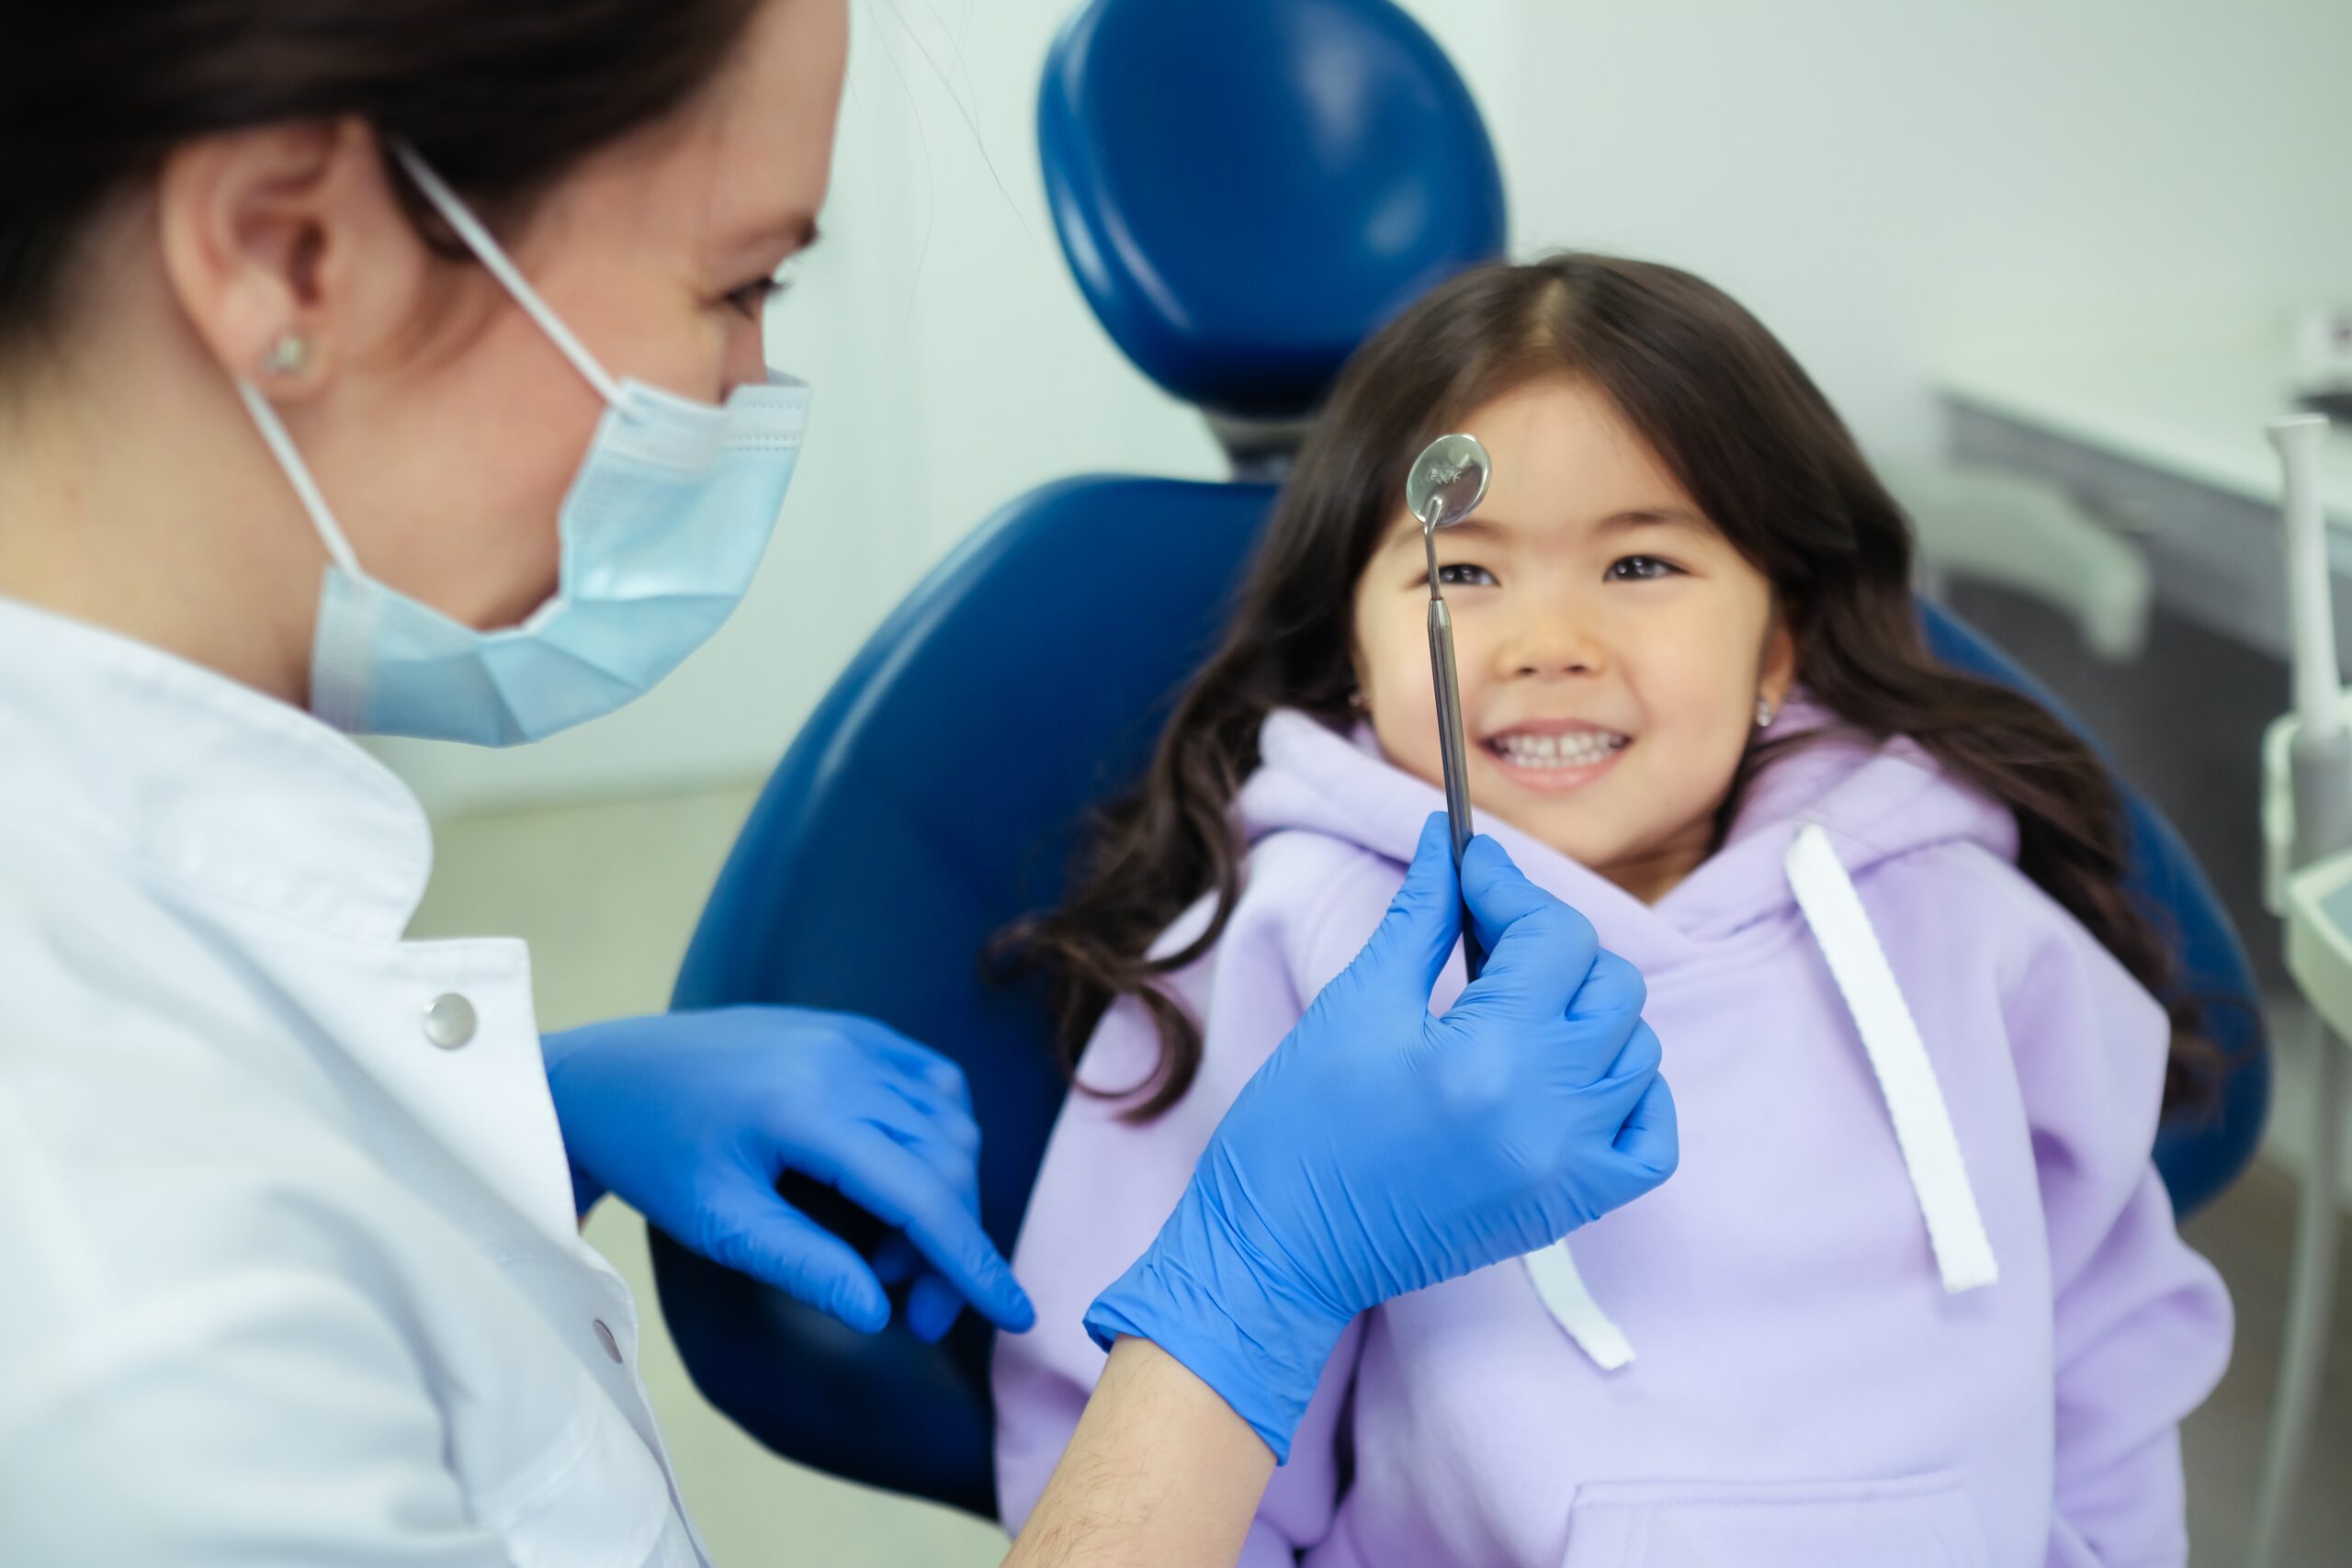 Young child at dentist